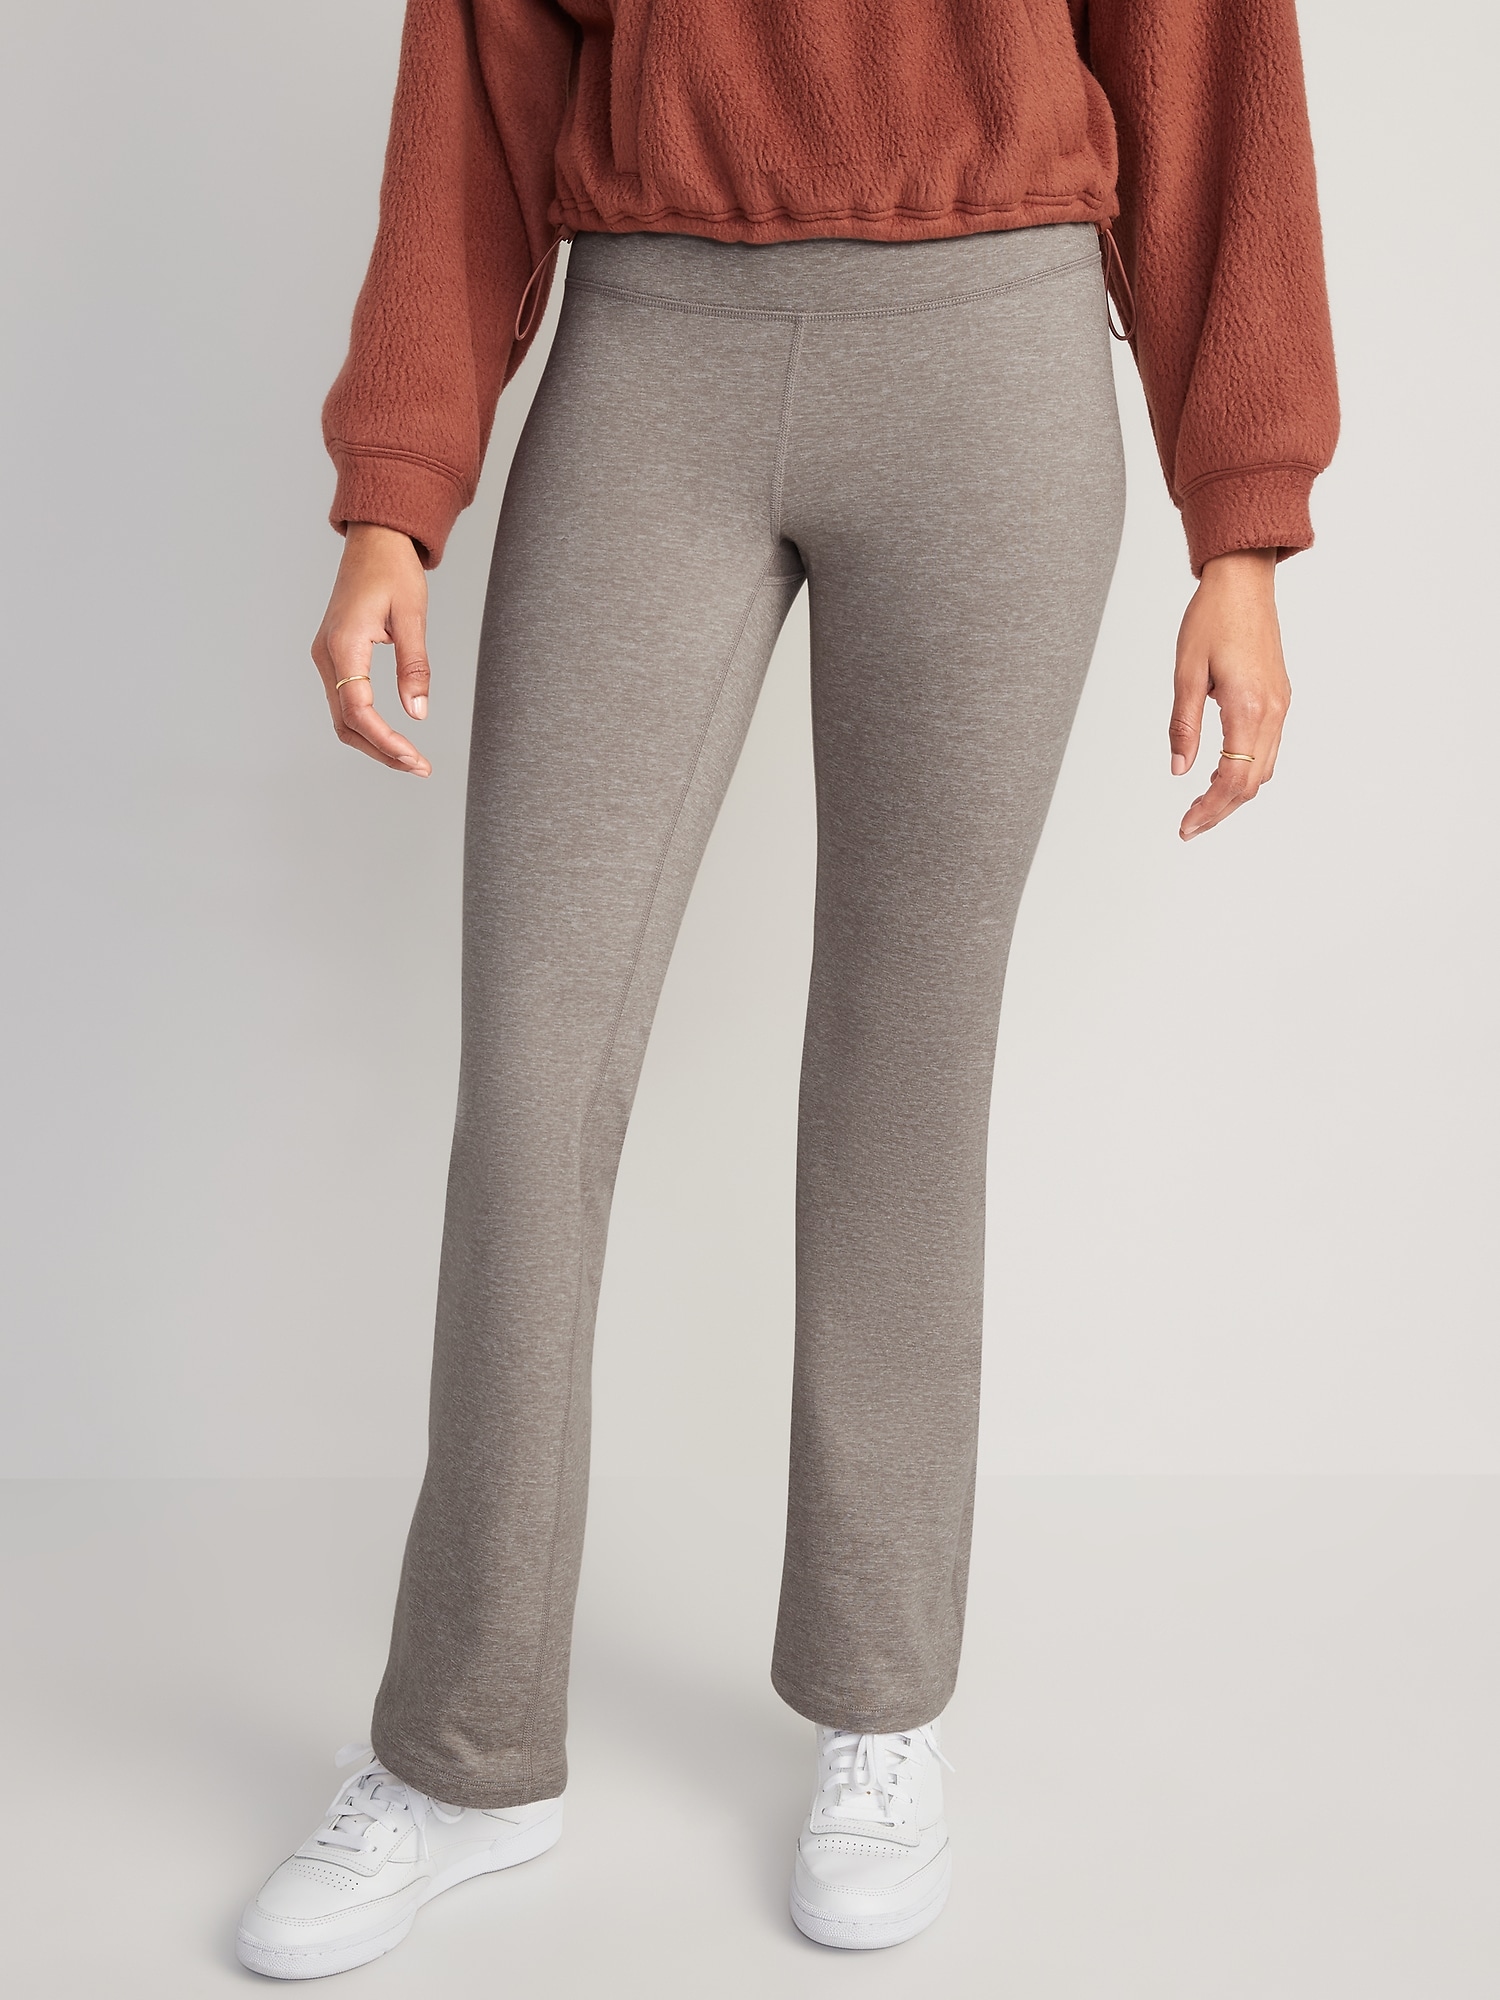 Old Navy Maternity High-Waisted CozeCore Slim Flare Leggings